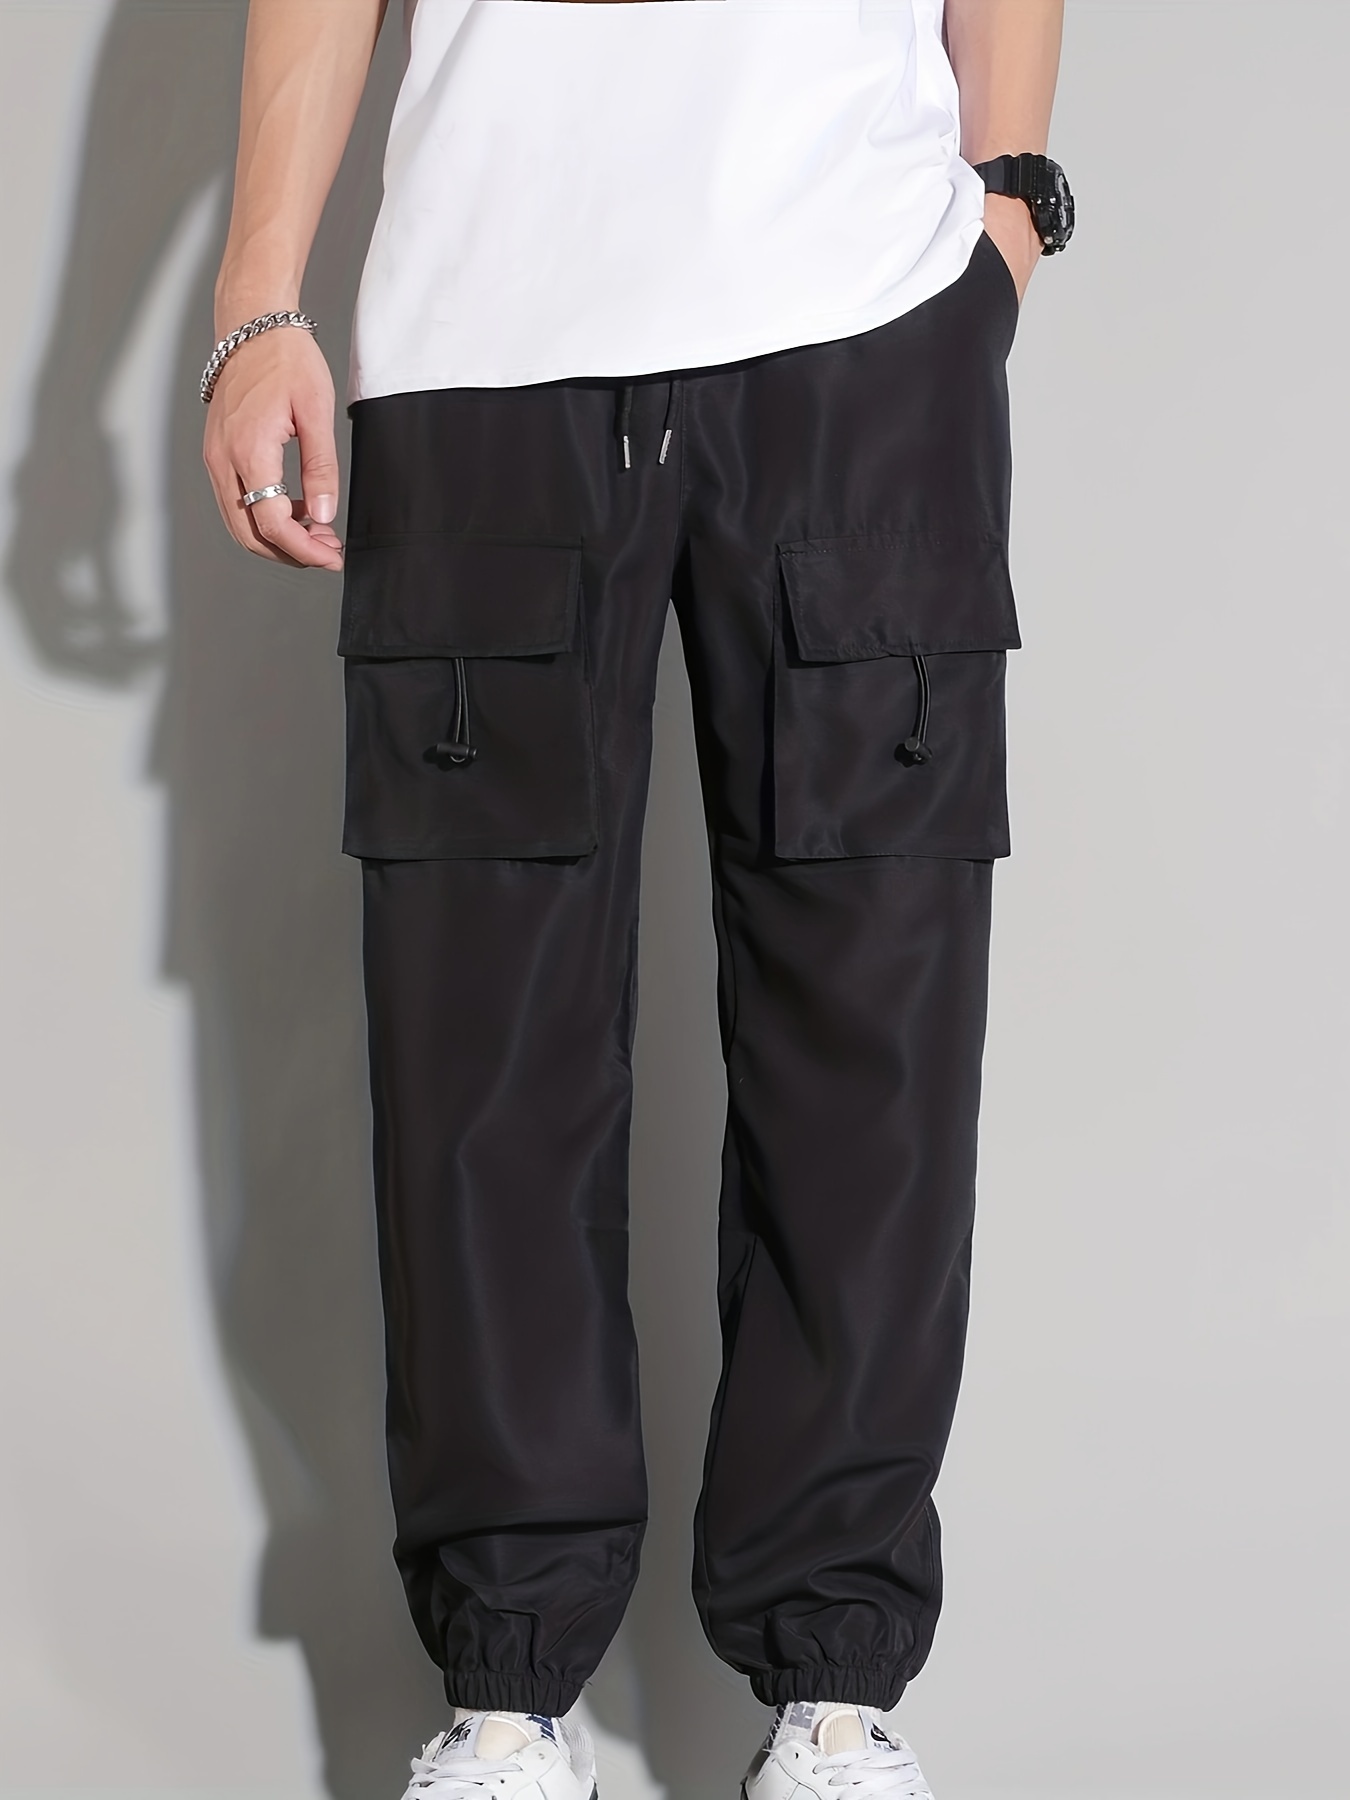 Plus Size Men's Relaxed Fit Cargo Trousers Pockets Oversized